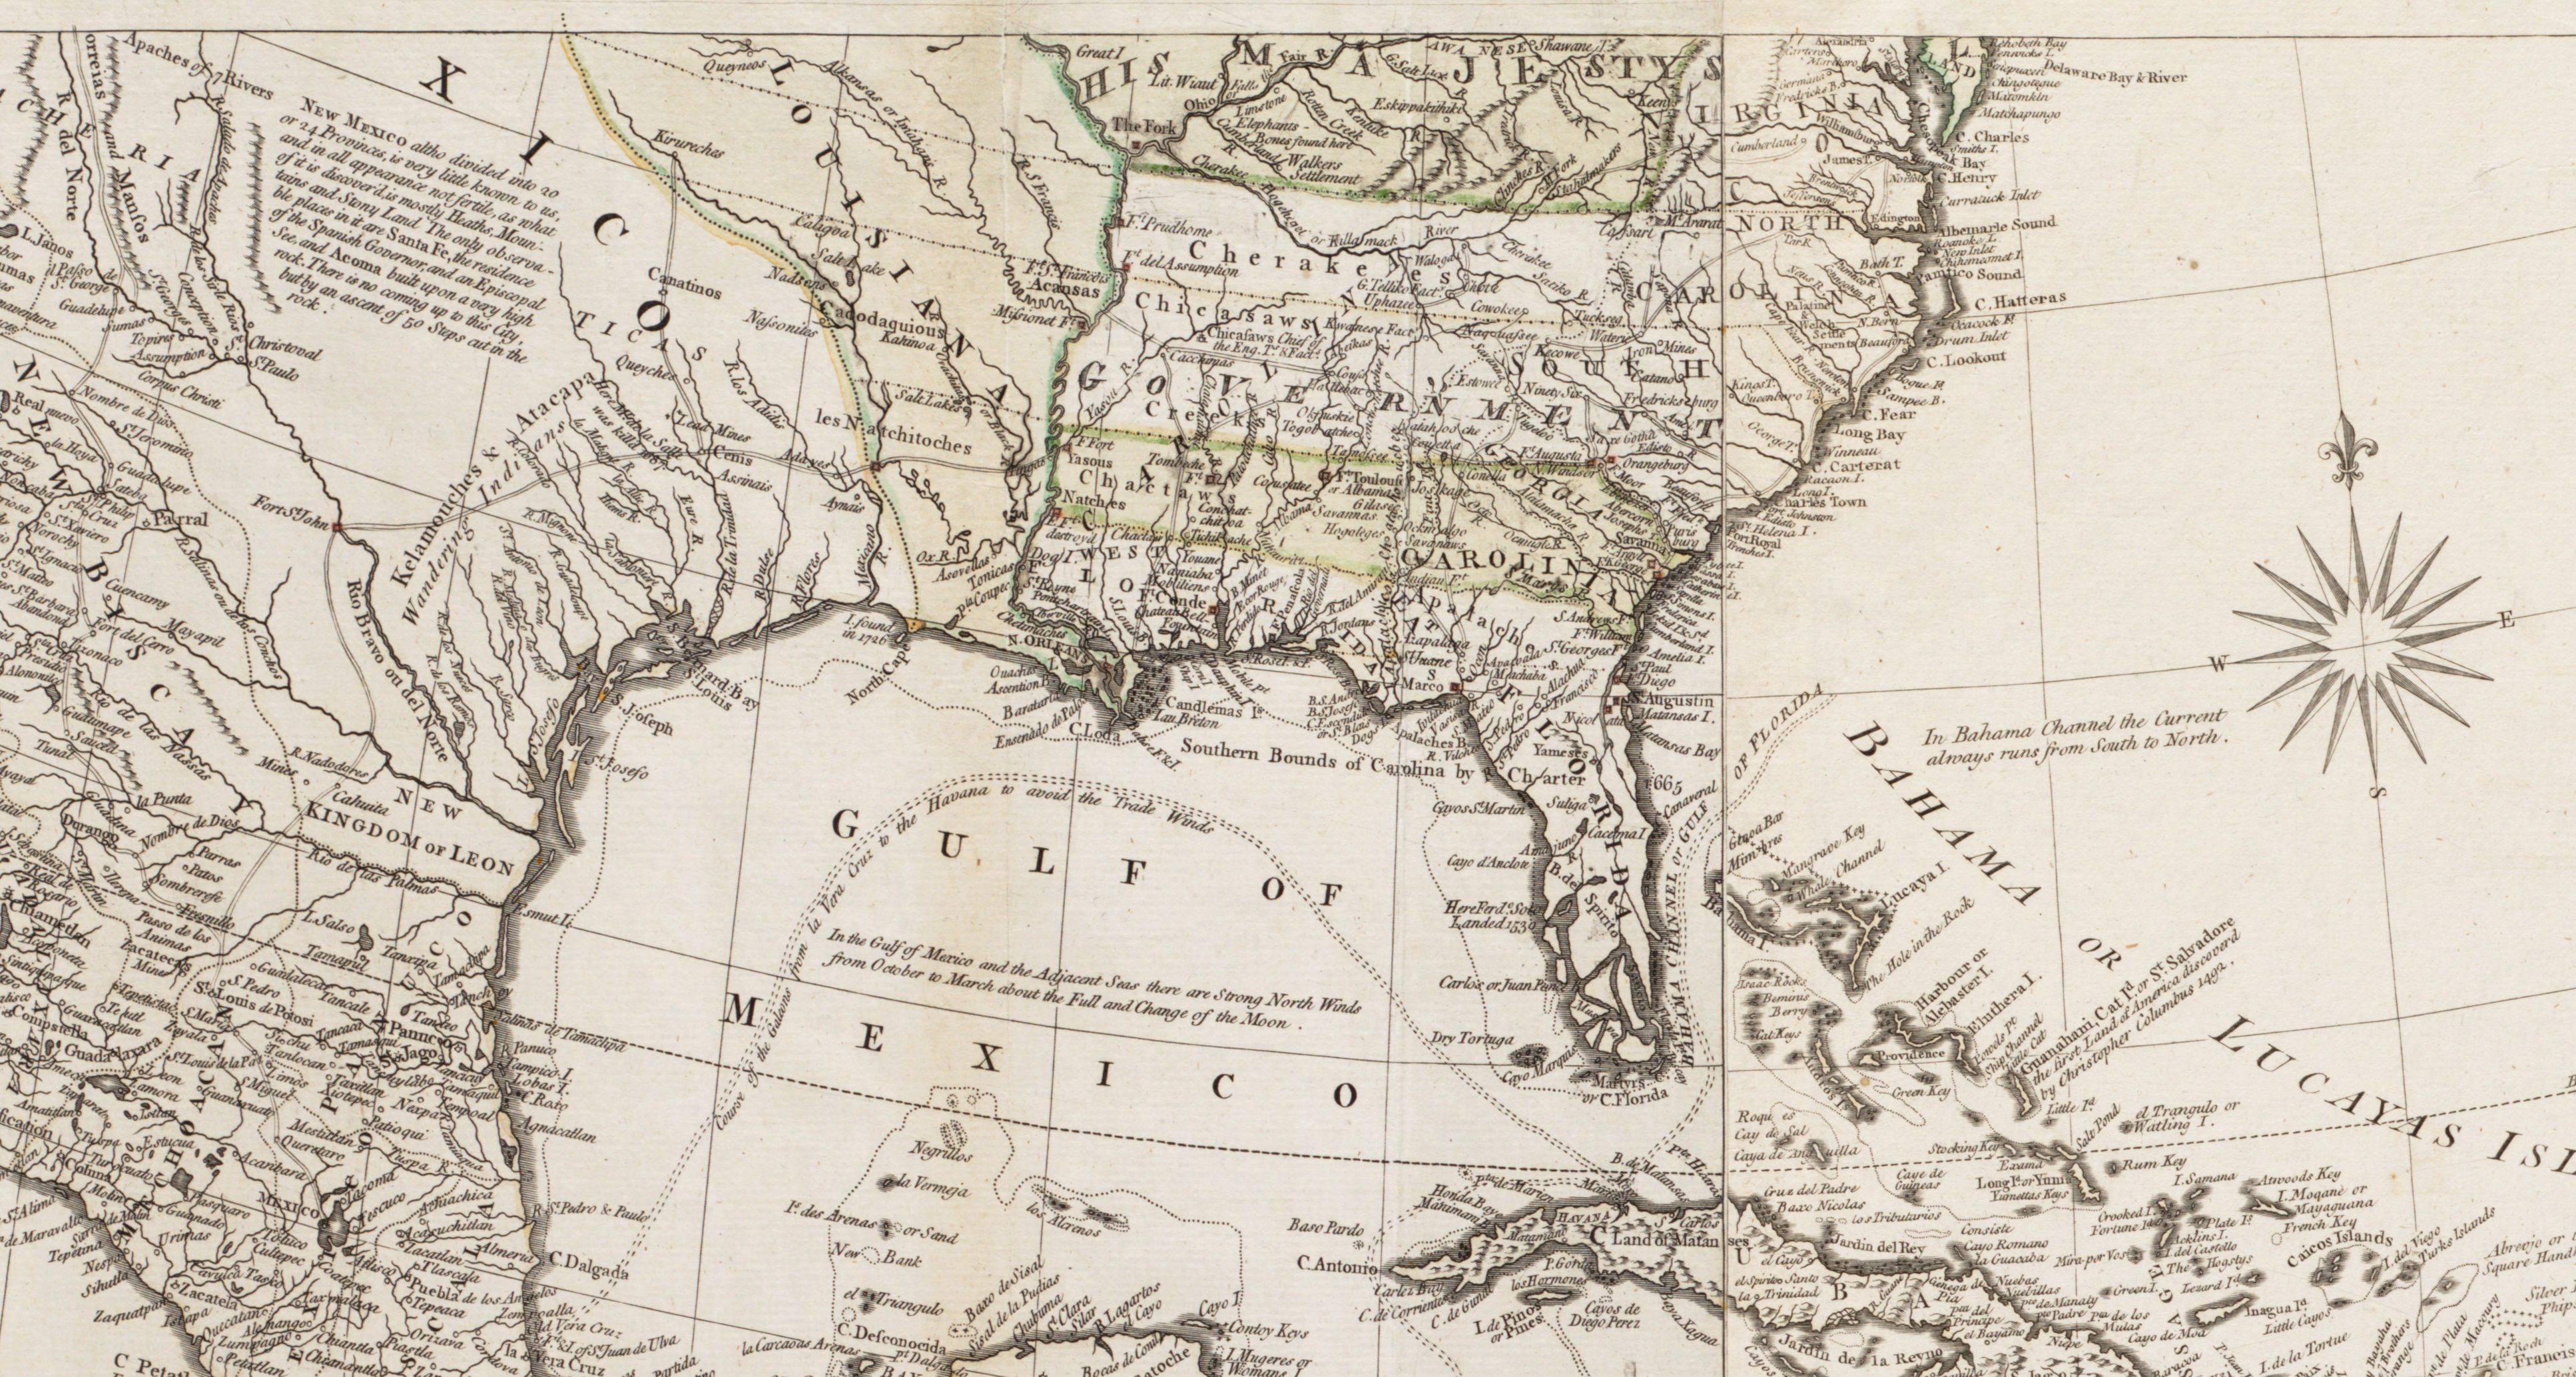 Detail of a hand-colored, printed map of North America. It includes many marginal notes on various aspects of the map and a small compass rose.